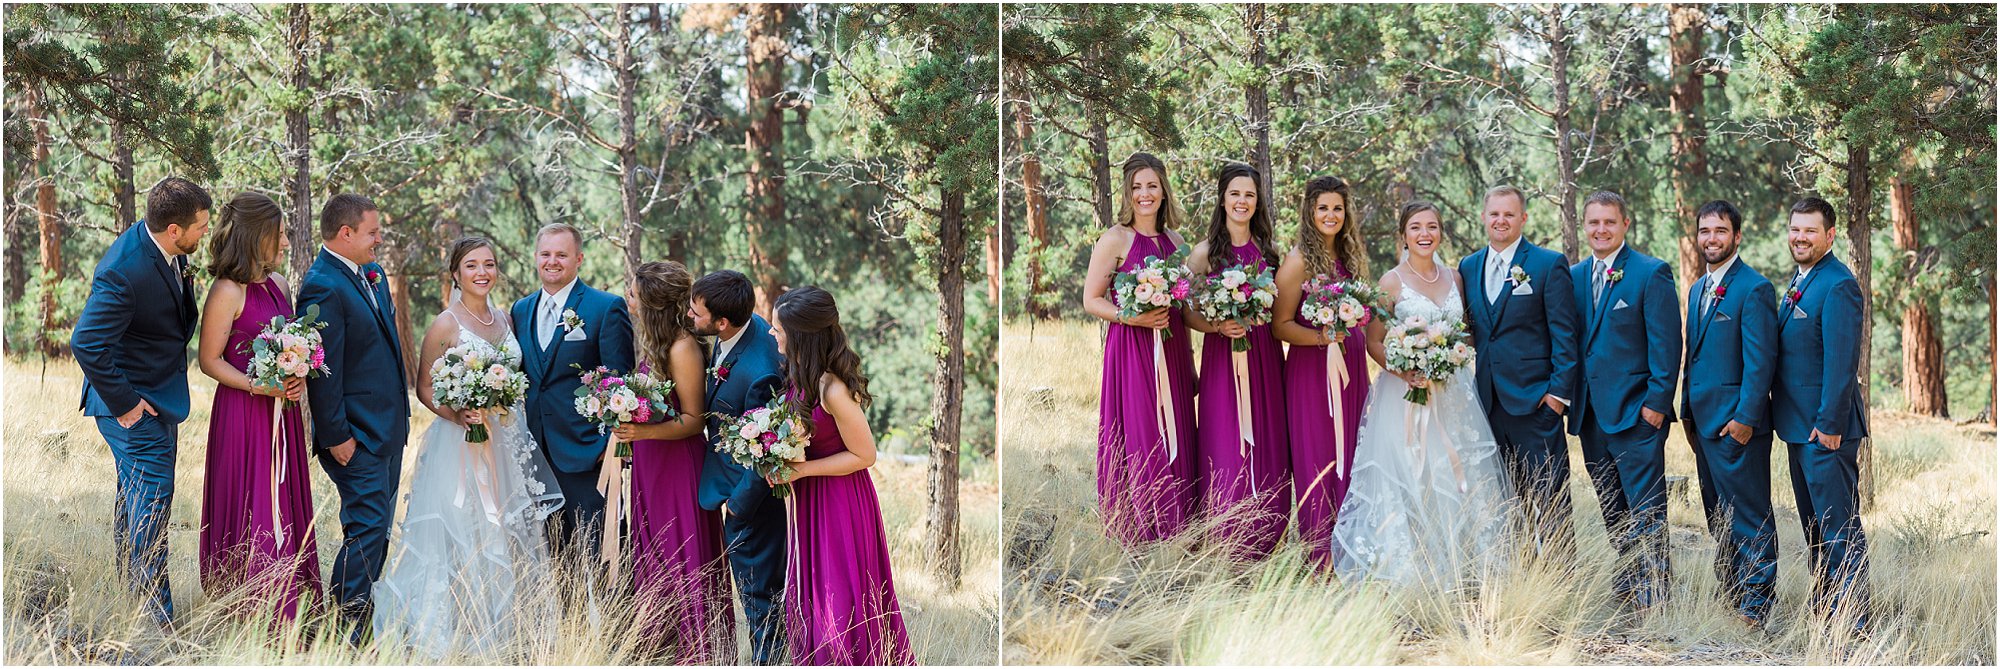 Bridesmaids wearing beautiful mauve dresses and groomsmen is classy blue suits for this rustic meets winery themed wedding at Rock Springs Ranch near Bend, OR. | Erica Swantek Photography